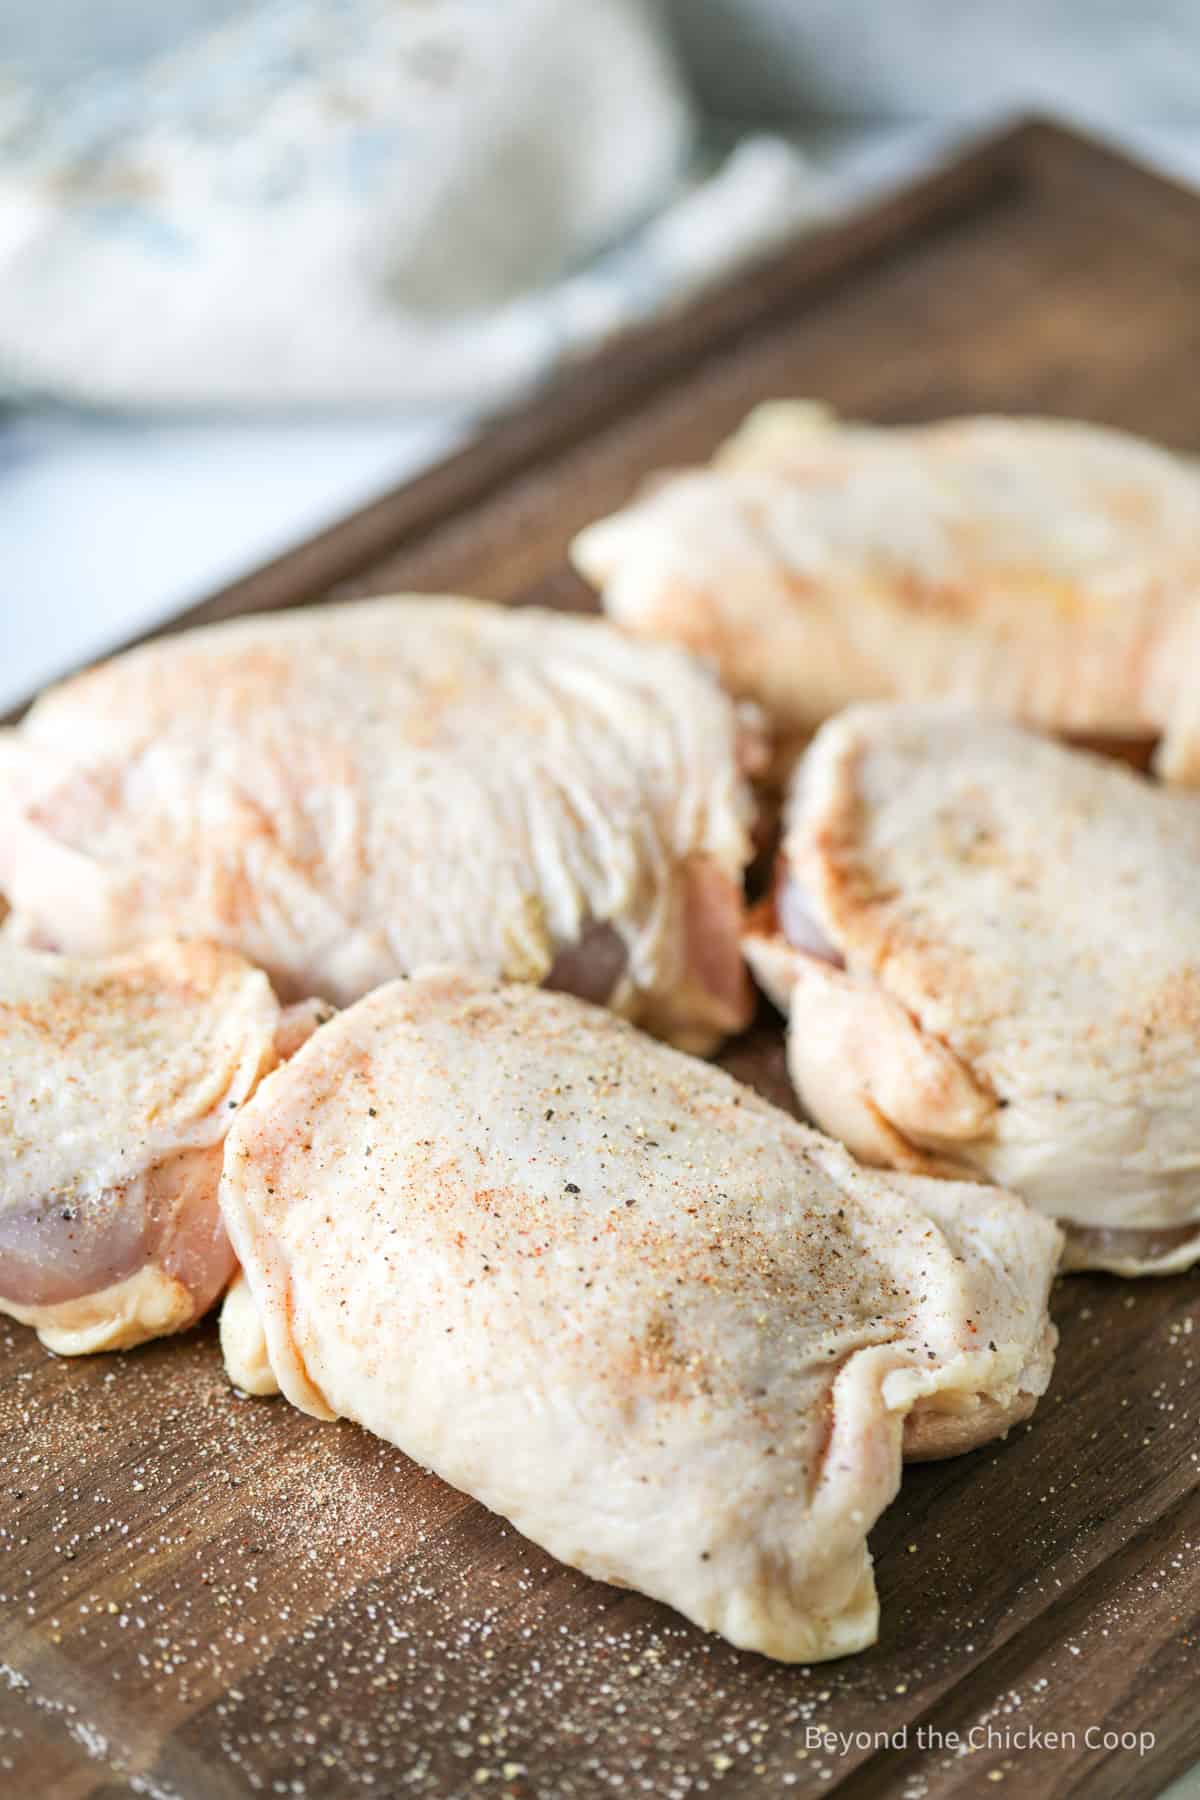 Chicken thighs with seasoning.